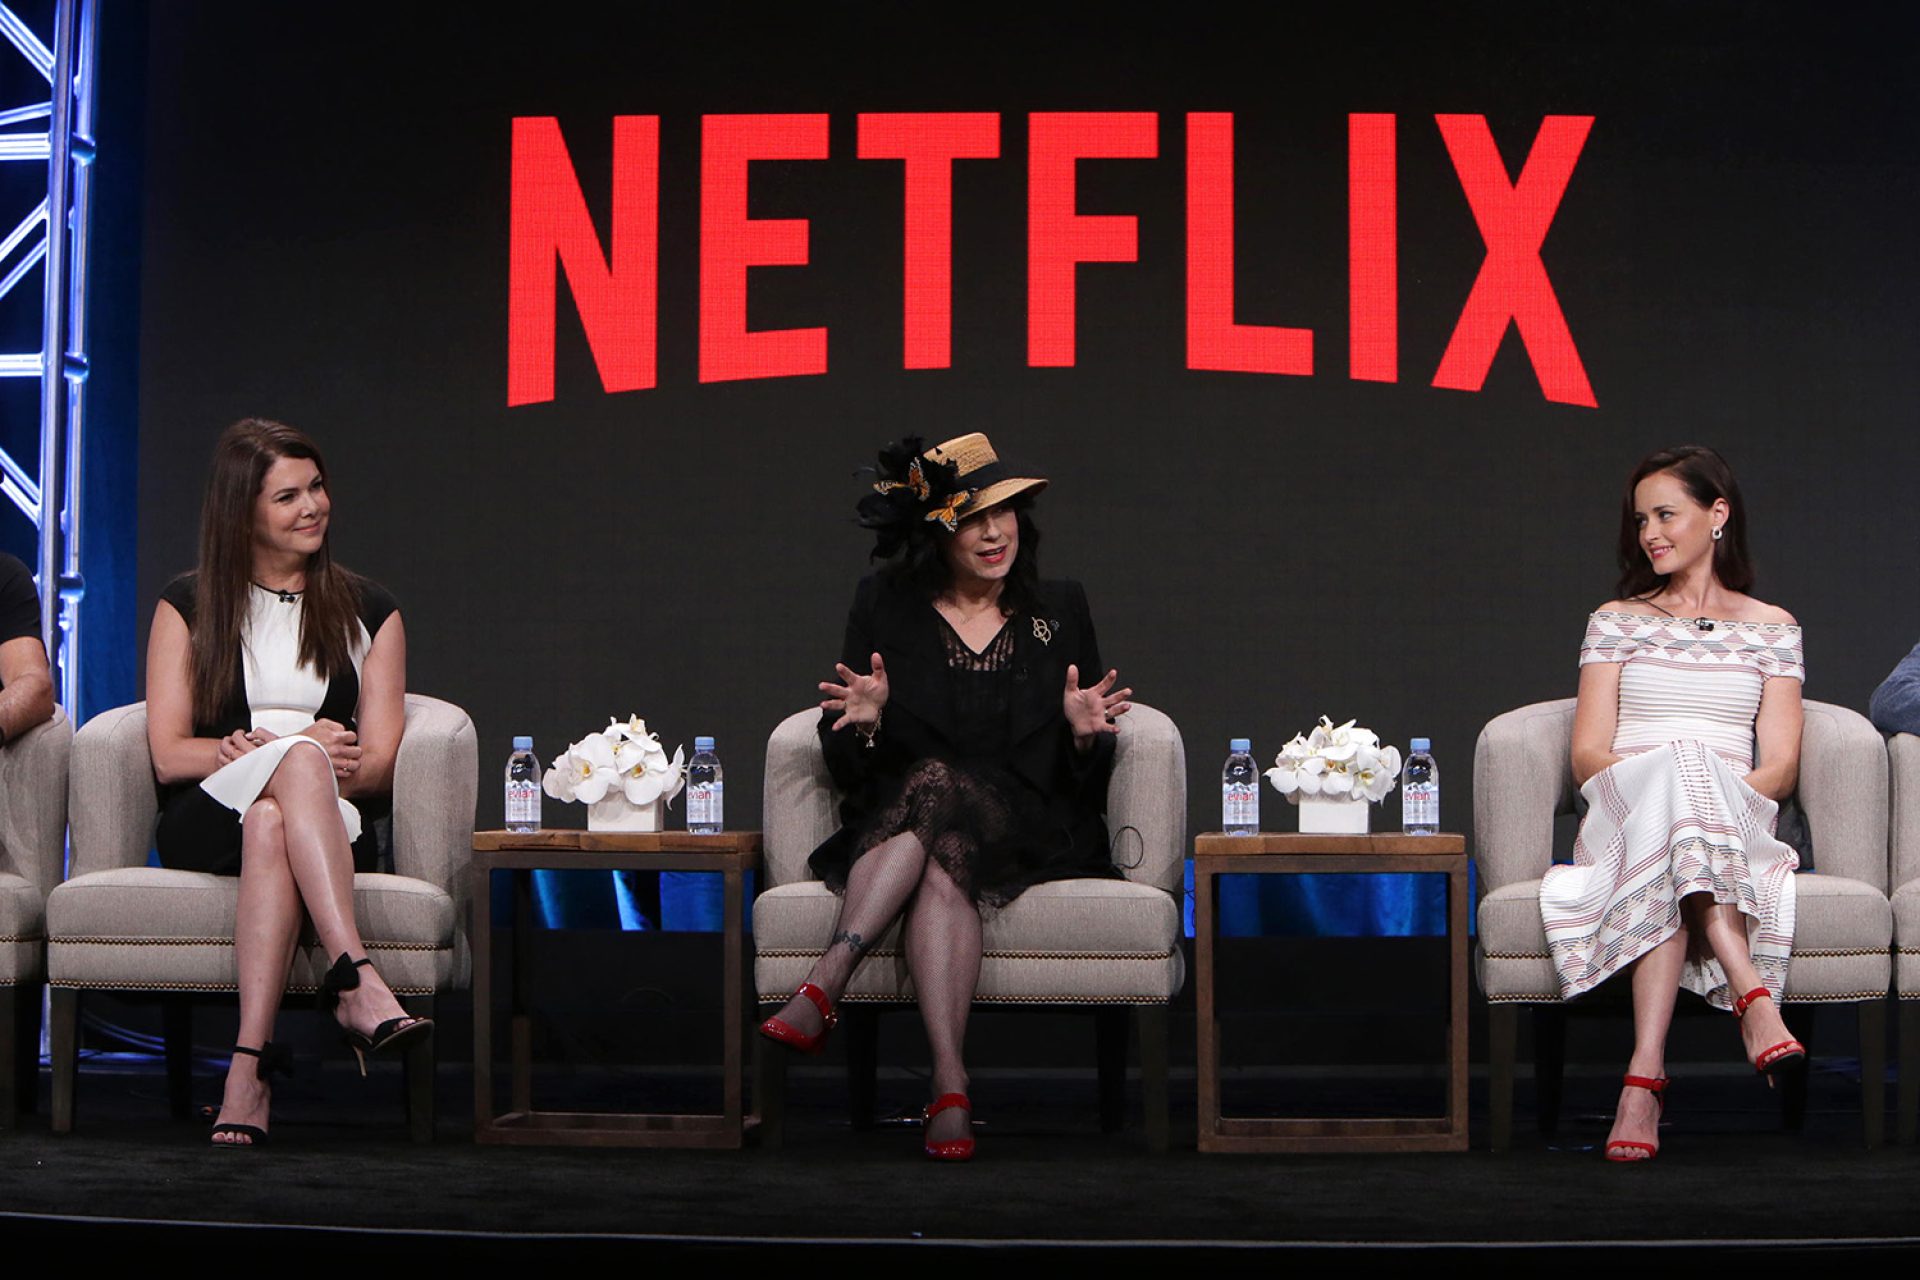 Gilmore Girls at Netflix 2016 Summer TCA at the Beverly Hilton Hotel on Wednesday, July 27, 2016, in Beverly Hills, CA. (Photo by Eric Charbonneau/Netflix)